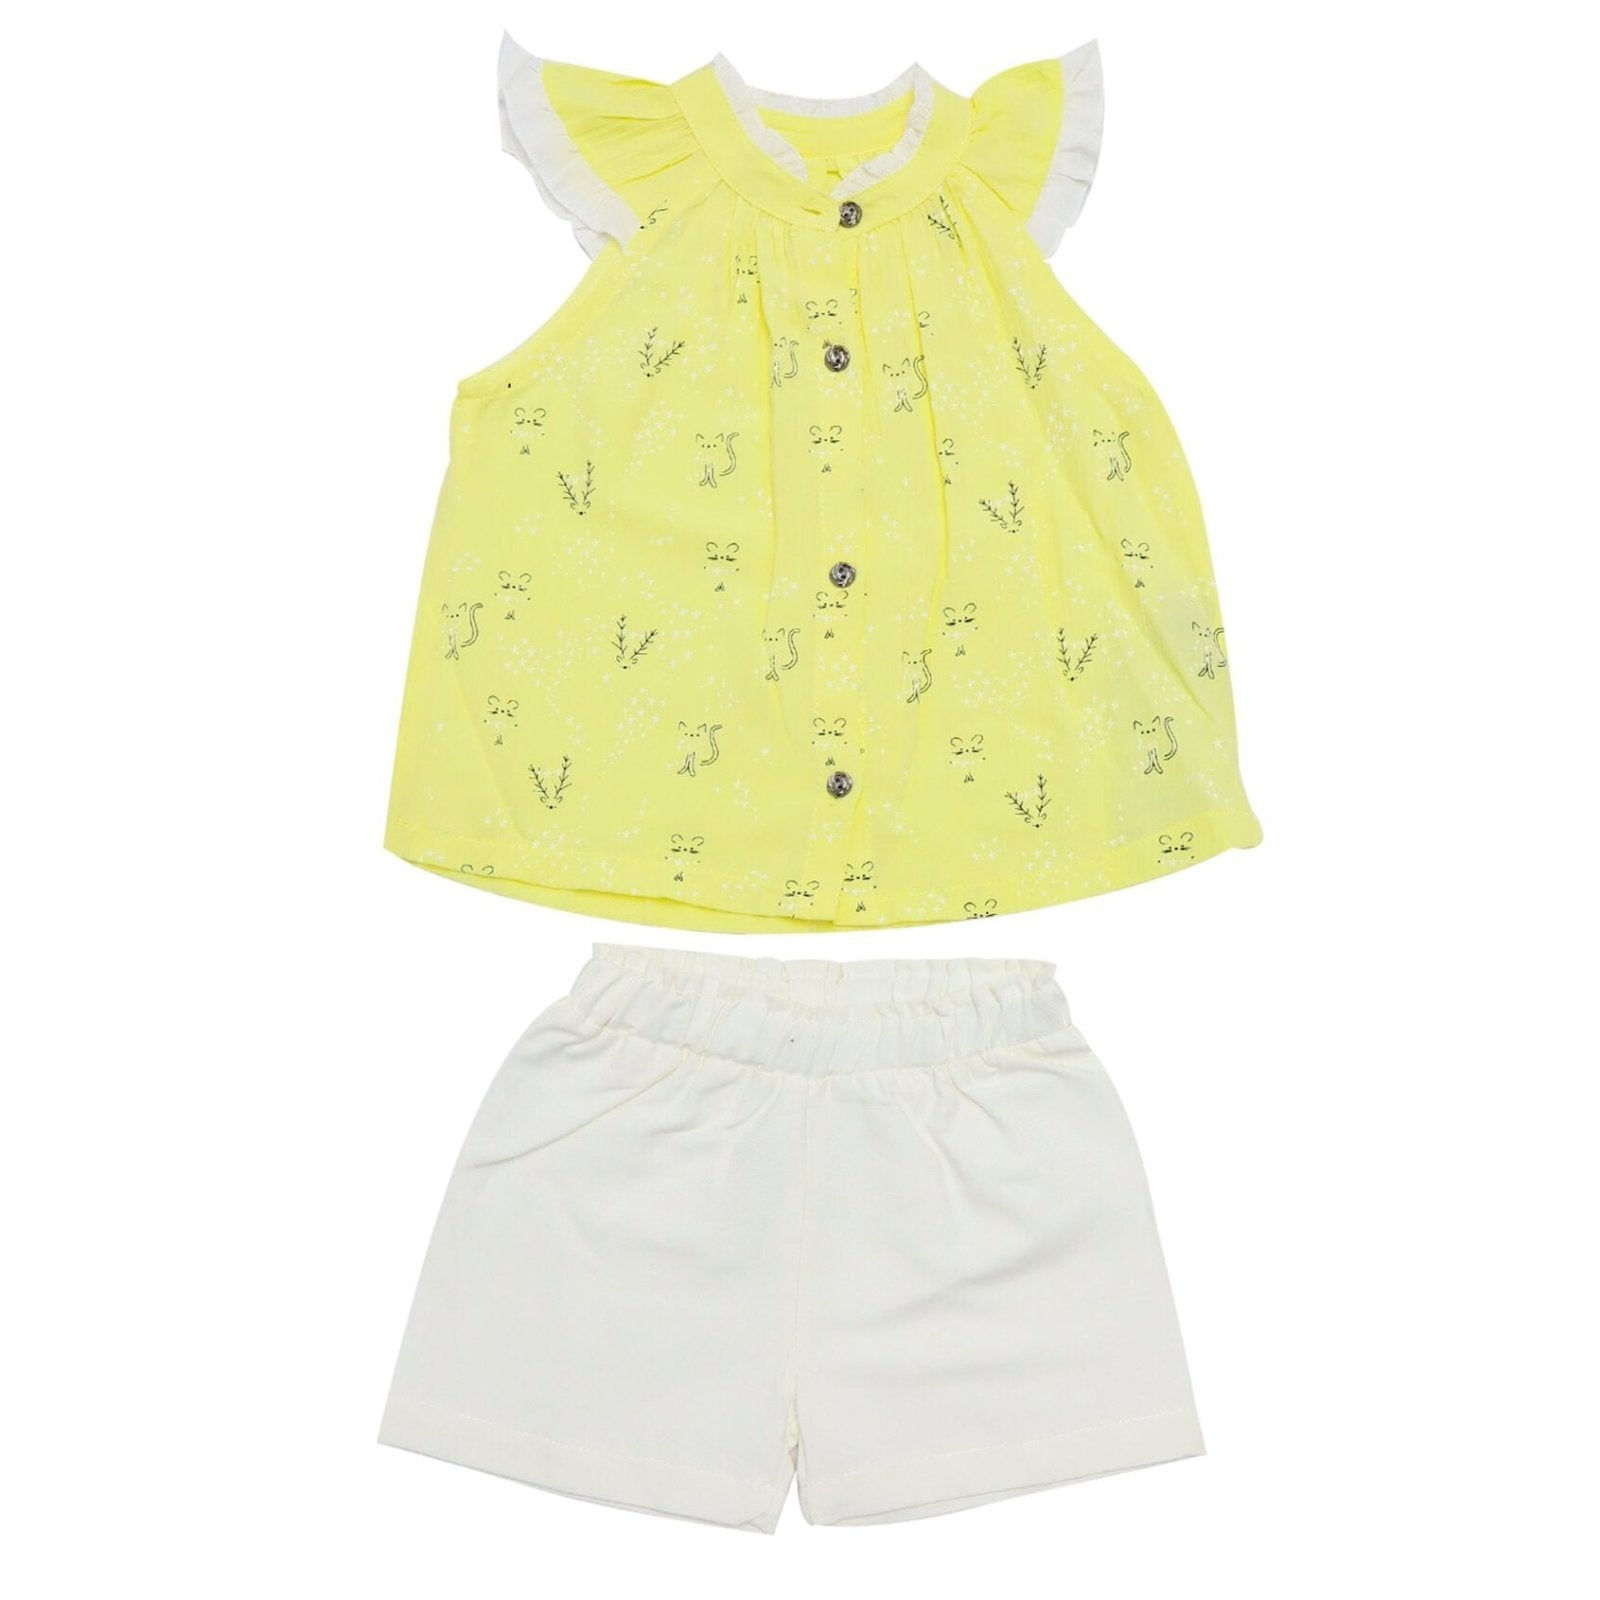 Girls Suit Tiny Cat Print Yellow Color | Made In Turkey - Zubaidas Mothershop